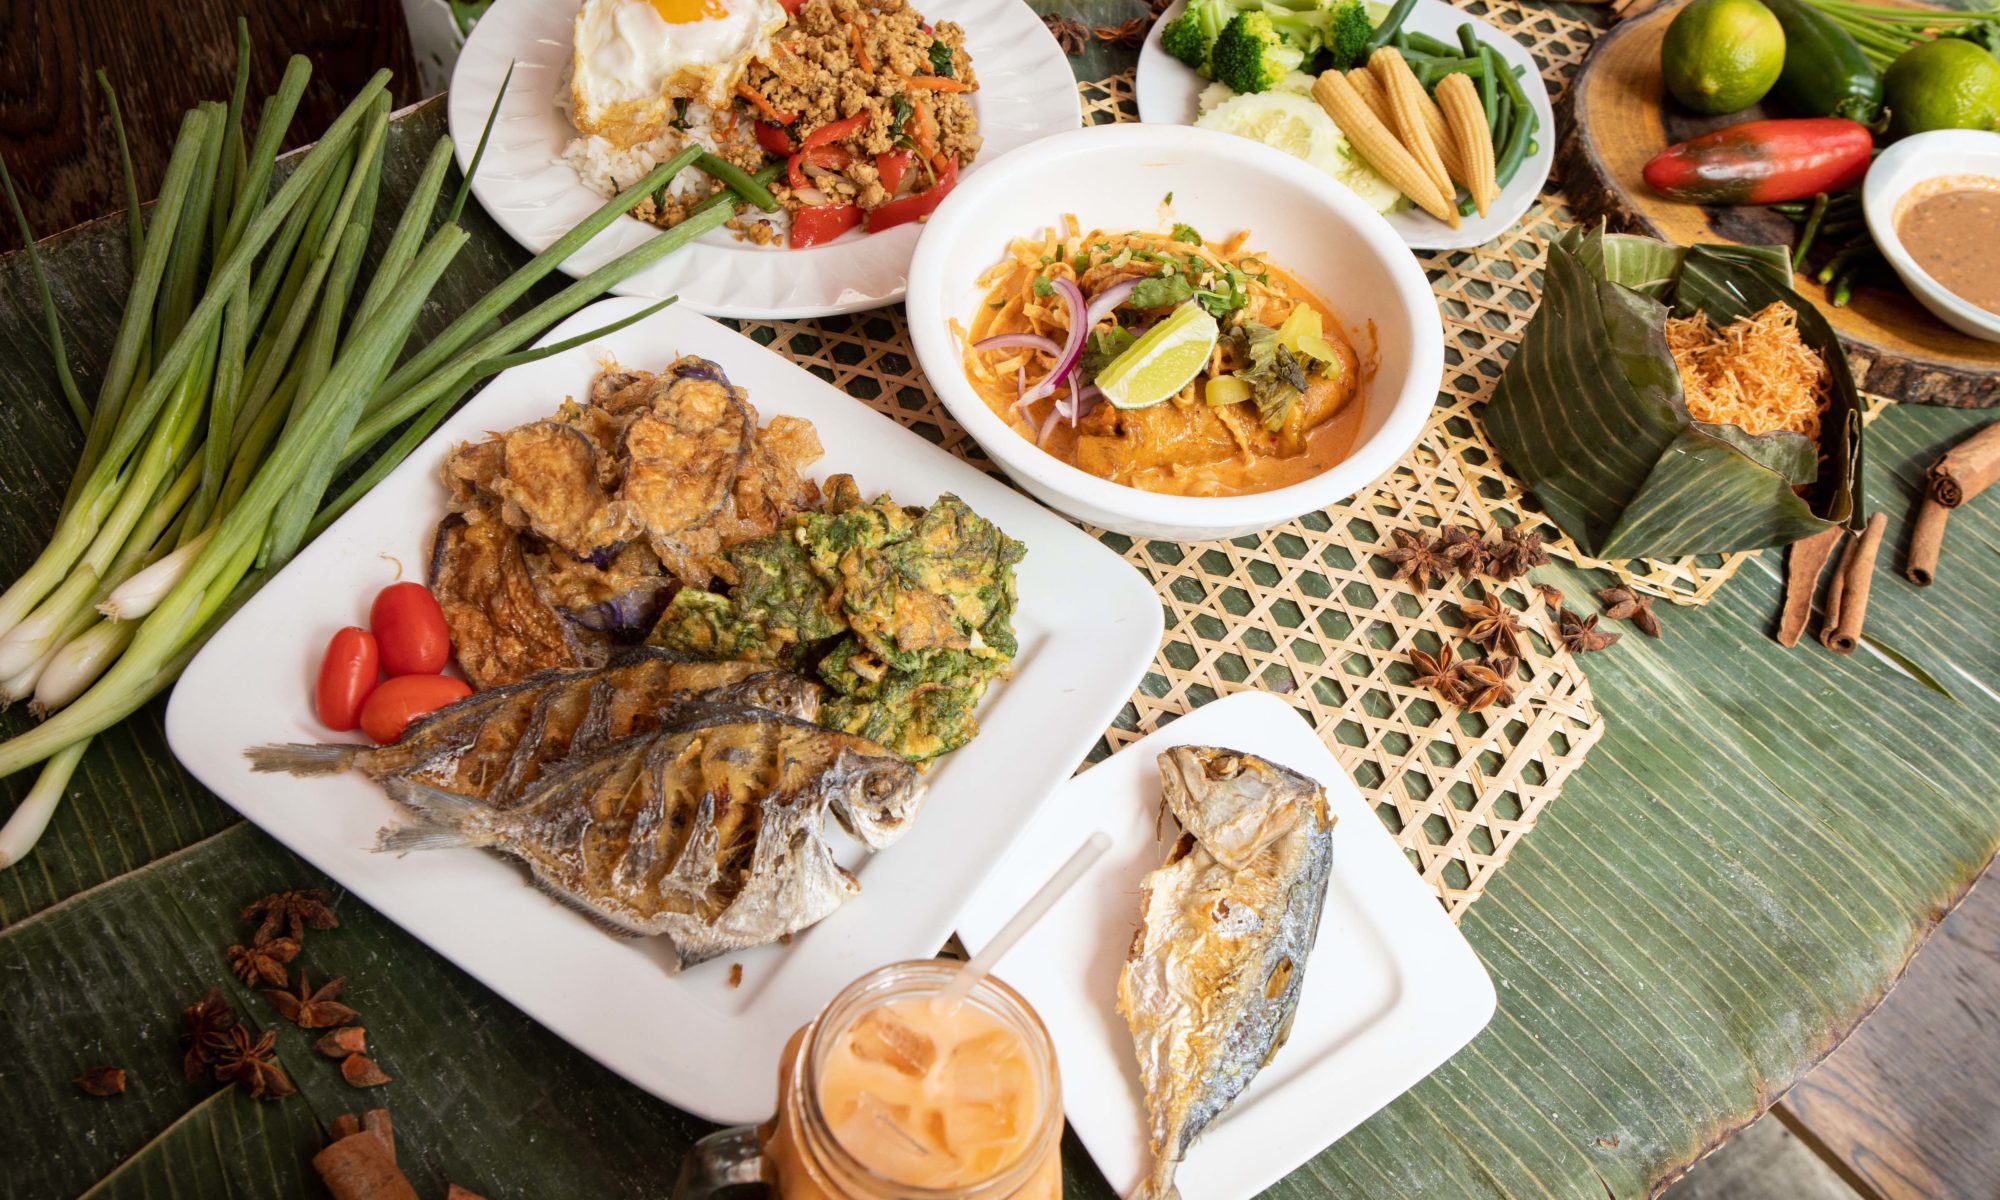 Photo of plates of food on a table, including fish, curry, carrots, rice, and Thai iced tea